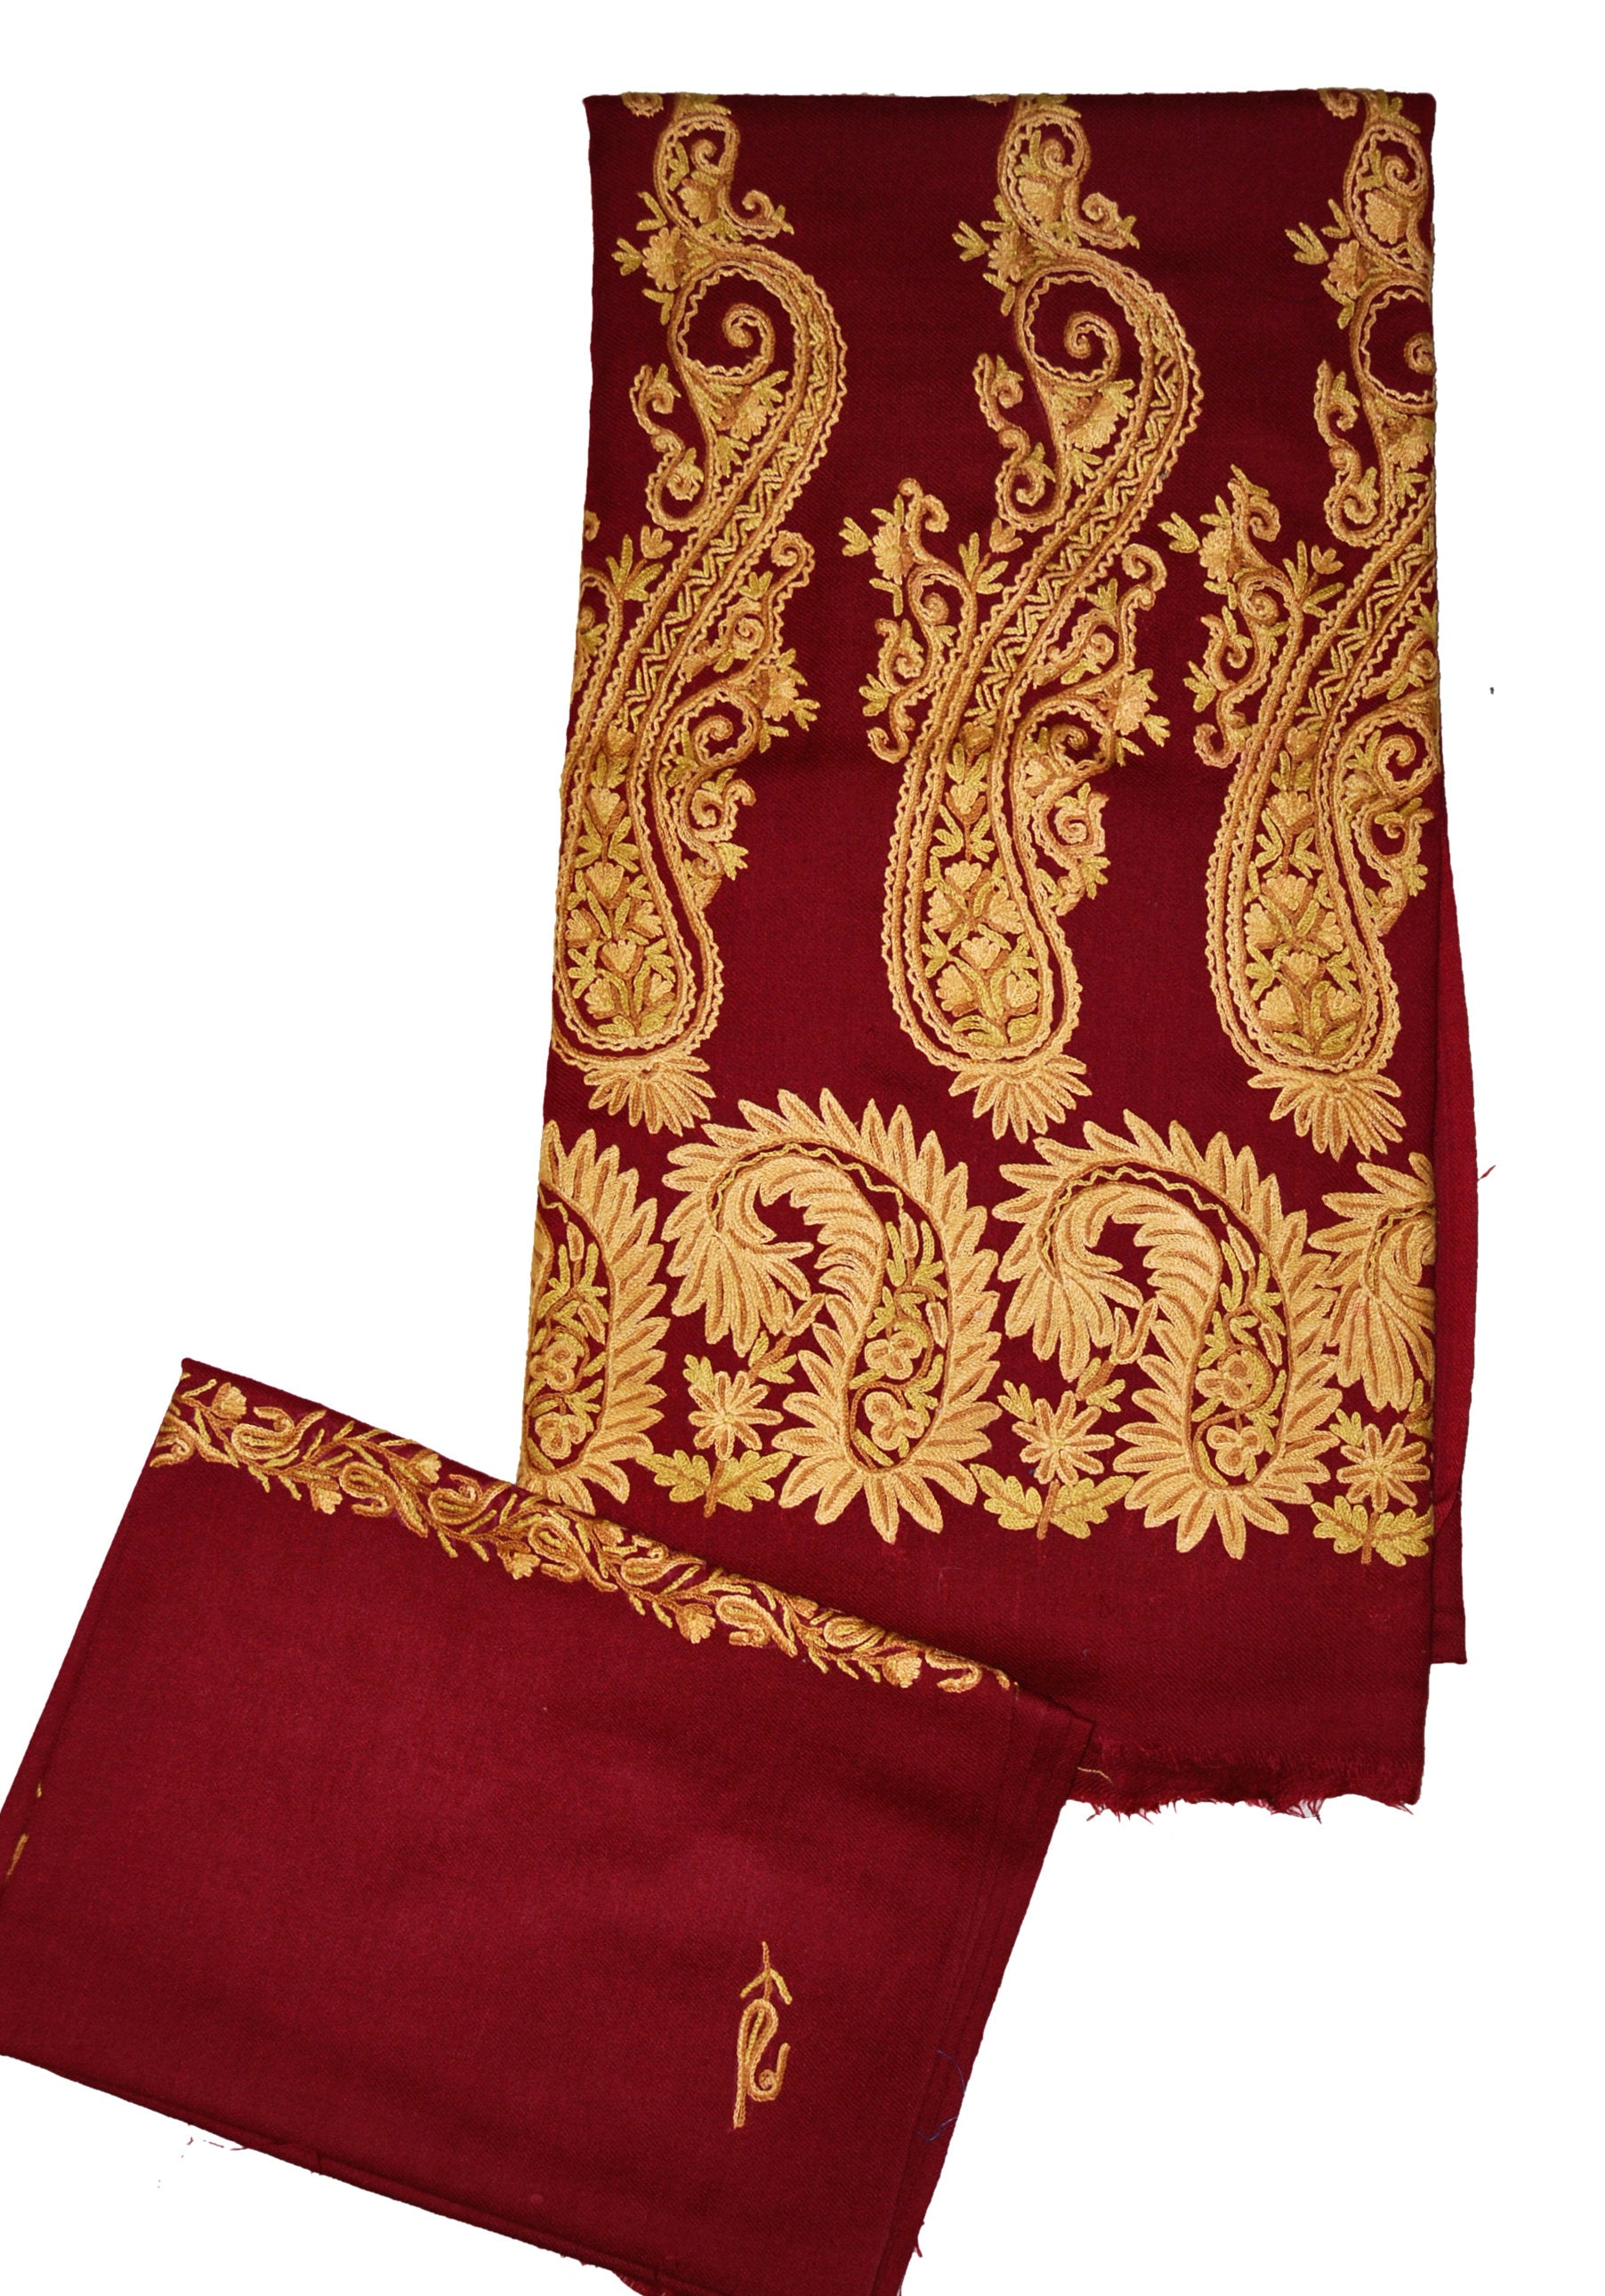 Woolen Salwar Kameez Suit Unstitched Fabric and Shawl Maroon, Rust Embroidery #FS-434